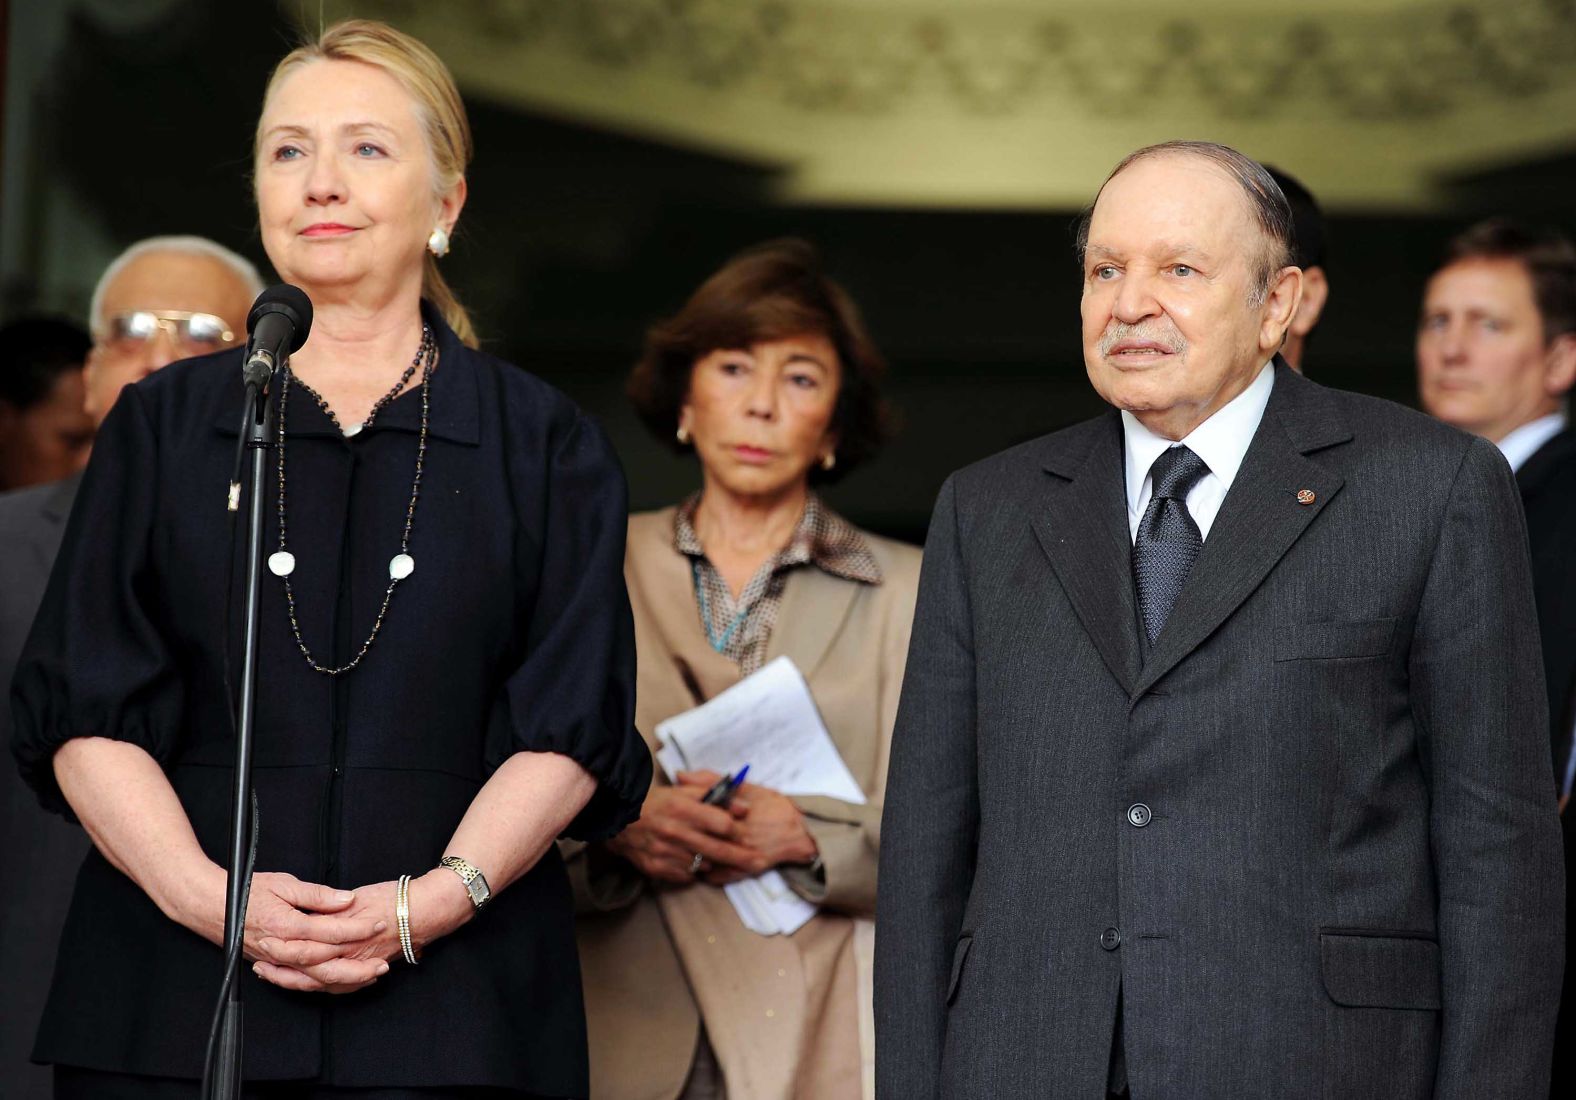 US Secretary of State Hillary Clinton appears at a news conference with Bouteflika following a meeting in Algiers in October 2012. Clinton held talks with Bouteflika to press for a possible military intervention in neighboring Mali, where Islamic extremists controlled large areas.